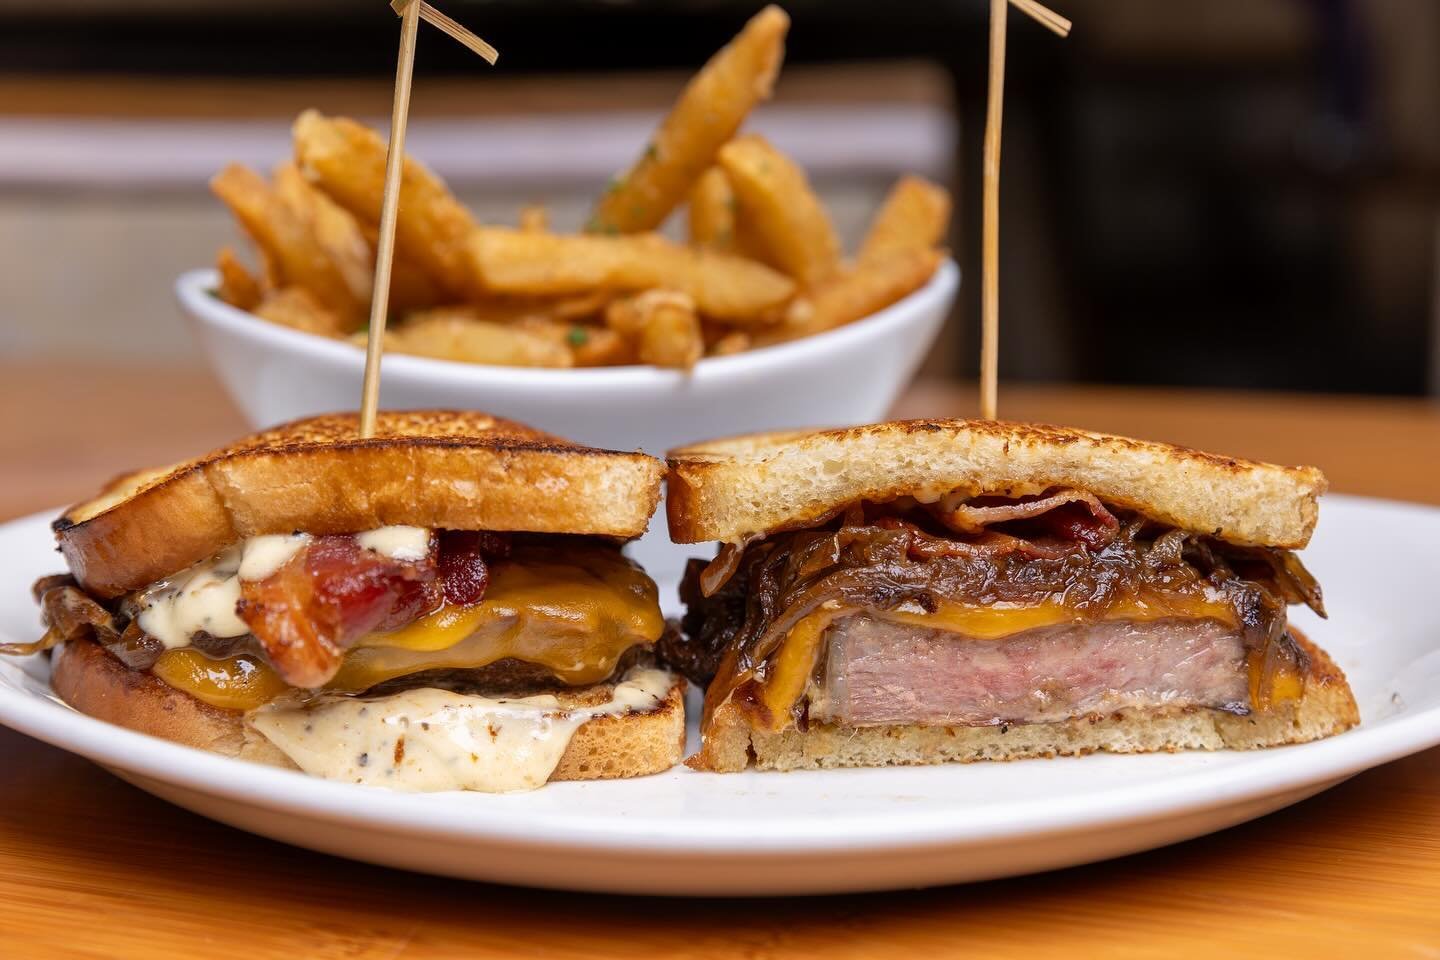 Refuel with a golfer&rsquo;s favorite: our Griddled Certified Angus Beef Prime Rib Sandwich. Featuring smoky bacon, caramelized onions, Vermont cheddar cheese, and mustard peppered mayo on griddled sourdough, served with garlic fries. Perfect for a m